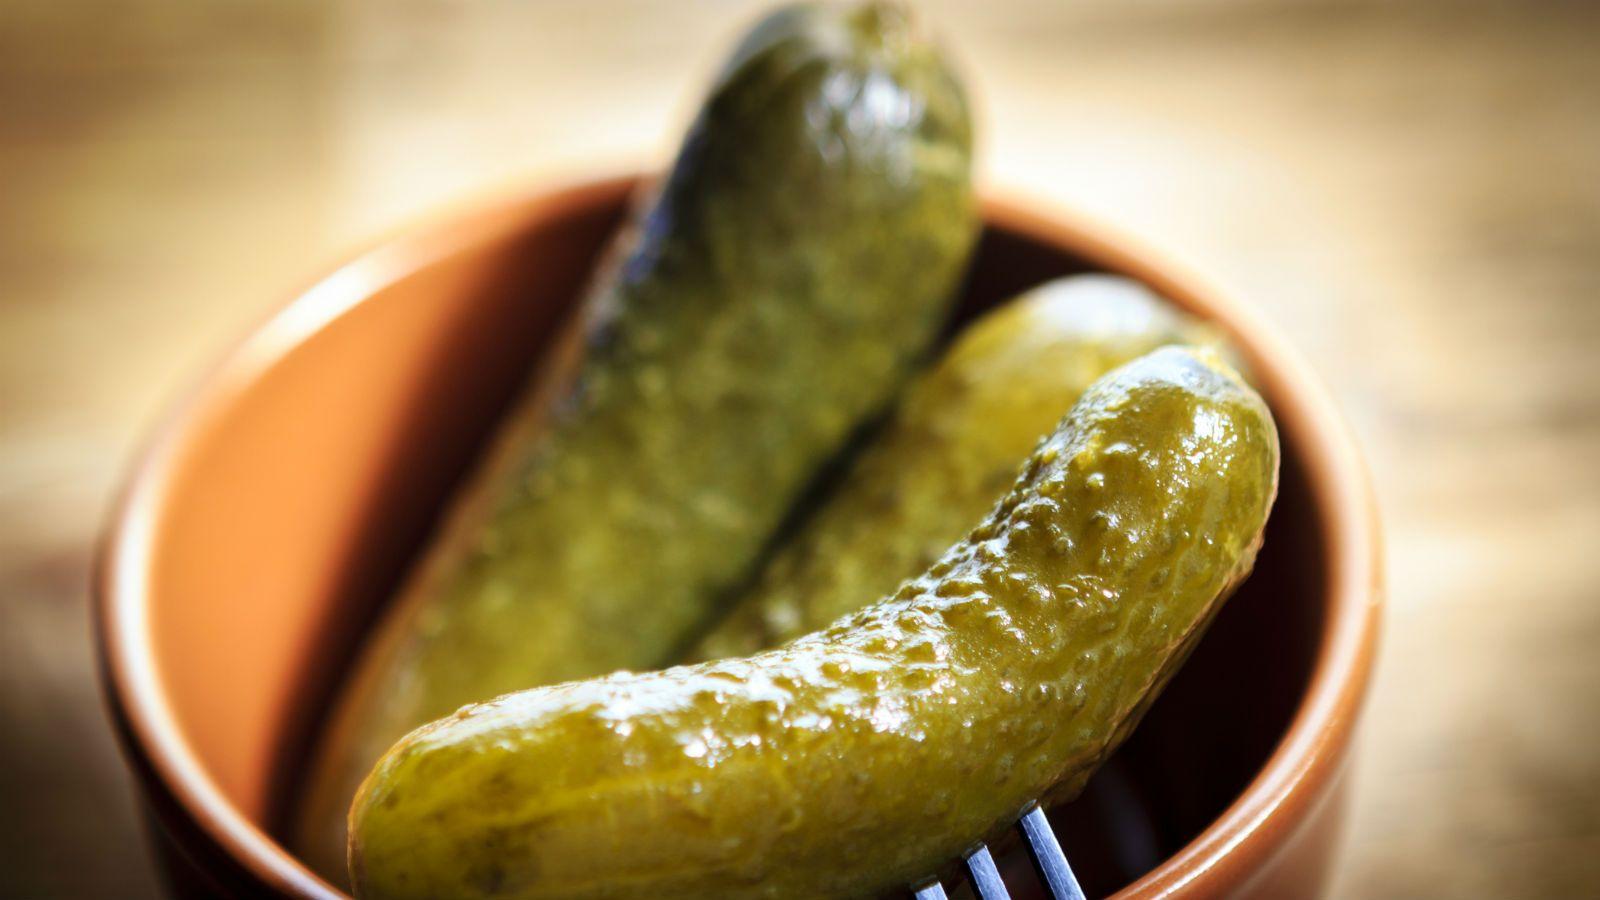 This Dill Pickle Recipe Goes Too Far.